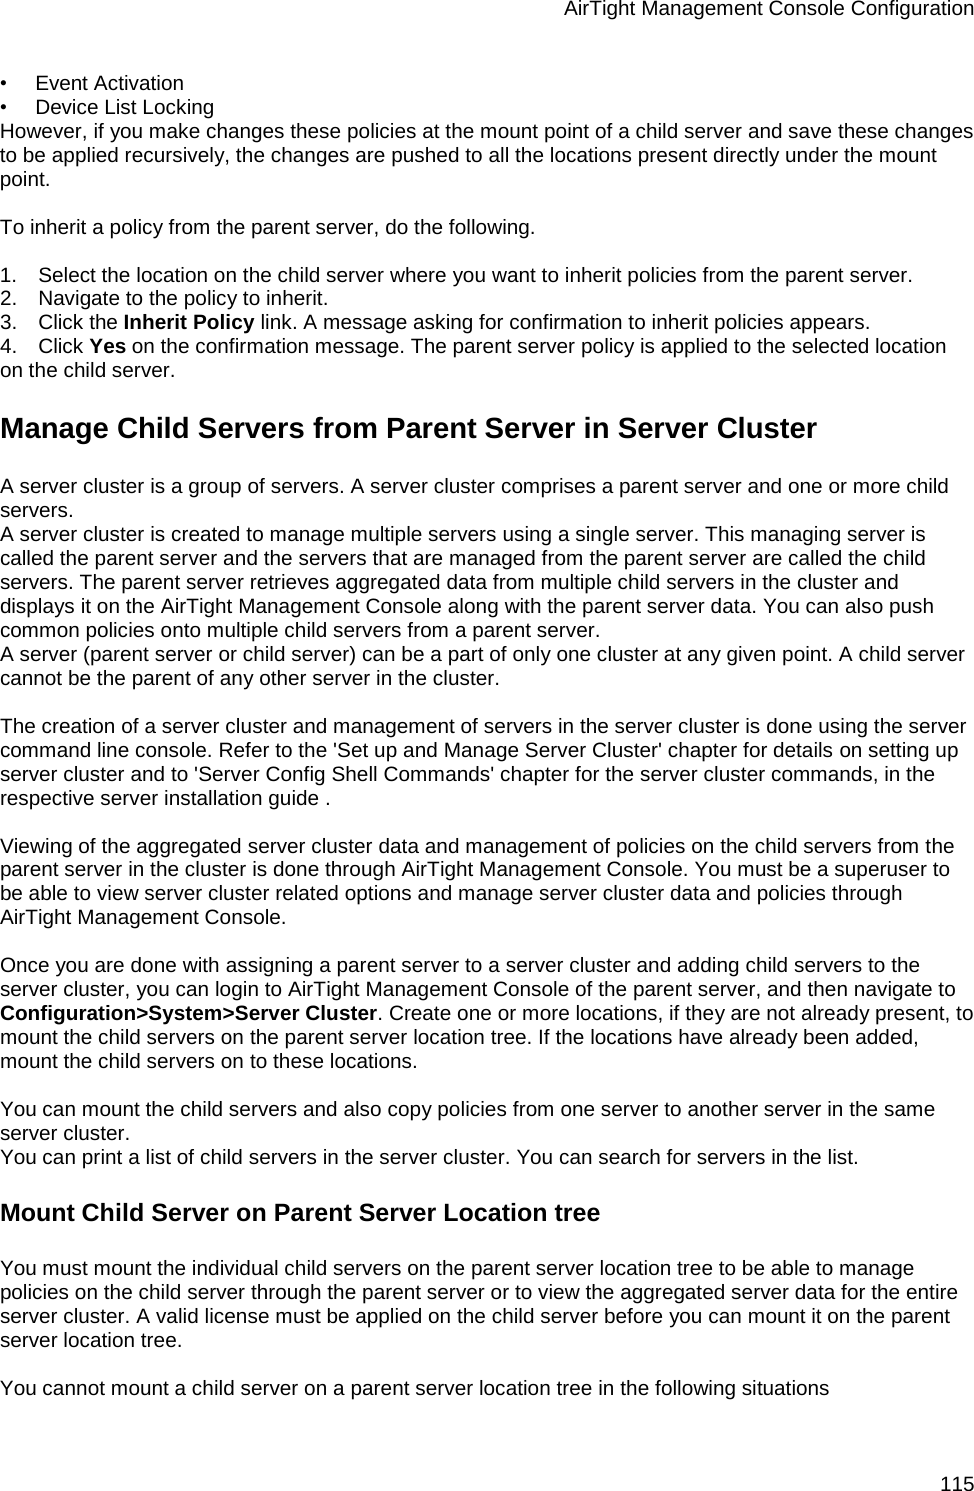 AirTight Management Console Configuration 115 •        Event Activation •        Device List Locking However, if you make changes these policies at the mount point of a child server and save these changes to be applied recursively, the changes are pushed to all the locations present directly under the mount point.   To inherit a policy from the parent server, do the following.   1.      Select the location on the child server where you want to inherit policies from the parent server. 2.      Navigate to the policy to inherit. 3.      Click the Inherit Policy link. A message asking for confirmation to inherit policies appears. 4.      Click Yes on the confirmation message. The parent server policy is applied to the selected location on the child server. Manage Child Servers from Parent Server in Server Cluster A server cluster is a group of servers. A server cluster comprises a parent server and one or more child servers. A server cluster is created to manage multiple servers using a single server. This managing server is called the parent server and the servers that are managed from the parent server are called the child servers. The parent server retrieves aggregated data from multiple child servers in the cluster and displays it on the AirTight Management Console along with the parent server data. You can also push common policies onto multiple child servers from a parent server. A server (parent server or child server) can be a part of only one cluster at any given point. A child server cannot be the parent of any other server in the cluster.   The creation of a server cluster and management of servers in the server cluster is done using the server command line console. Refer to the &apos;Set up and Manage Server Cluster&apos; chapter for details on setting up server cluster and to &apos;Server Config Shell Commands&apos; chapter for the server cluster commands, in the respective server installation guide .   Viewing of the aggregated server cluster data and management of policies on the child servers from the parent server in the cluster is done through AirTight Management Console. You must be a superuser to be able to view server cluster related options and manage server cluster data and policies through AirTight Management Console.   Once you are done with assigning a parent server to a server cluster and adding child servers to the server cluster, you can login to AirTight Management Console of the parent server, and then navigate to Configuration&gt;System&gt;Server Cluster. Create one or more locations, if they are not already present, to mount the child servers on the parent server location tree. If the locations have already been added, mount the child servers on to these locations.   You can mount the child servers and also copy policies from one server to another server in the same server cluster. You can print a list of child servers in the server cluster. You can search for servers in the list. Mount Child Server on Parent Server Location tree You must mount the individual child servers on the parent server location tree to be able to manage policies on the child server through the parent server or to view the aggregated server data for the entire server cluster. A valid license must be applied on the child server before you can mount it on the parent server location tree.   You cannot mount a child server on a parent server location tree in the following situations 